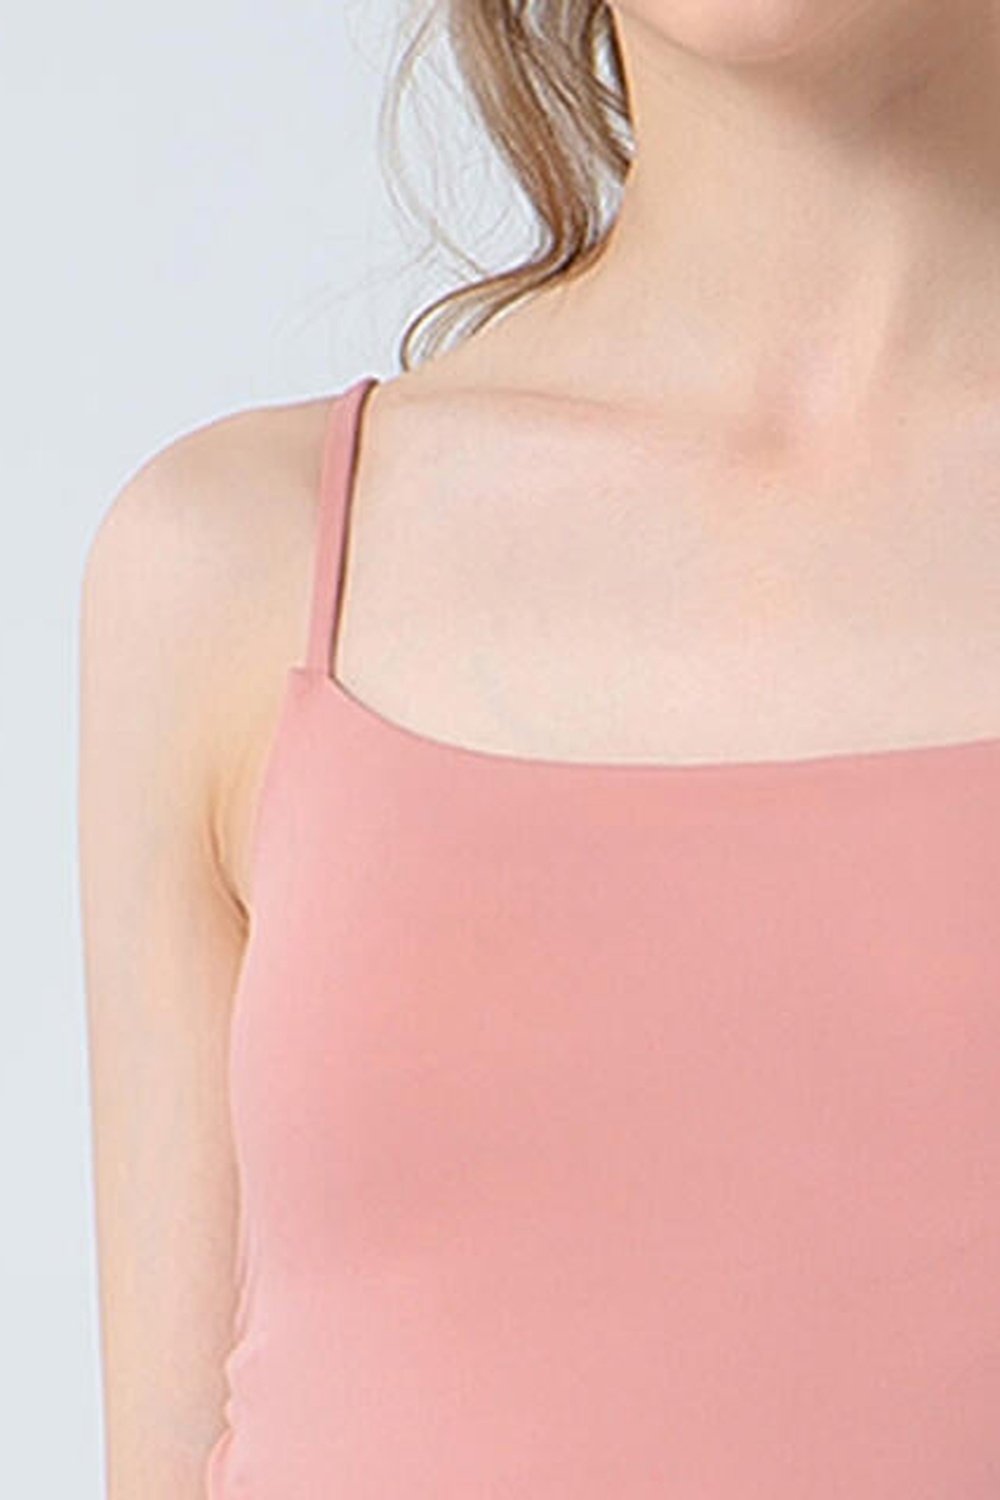 Ruched Sports Cami - Crop Tops & Tank Tops - FITGGINS